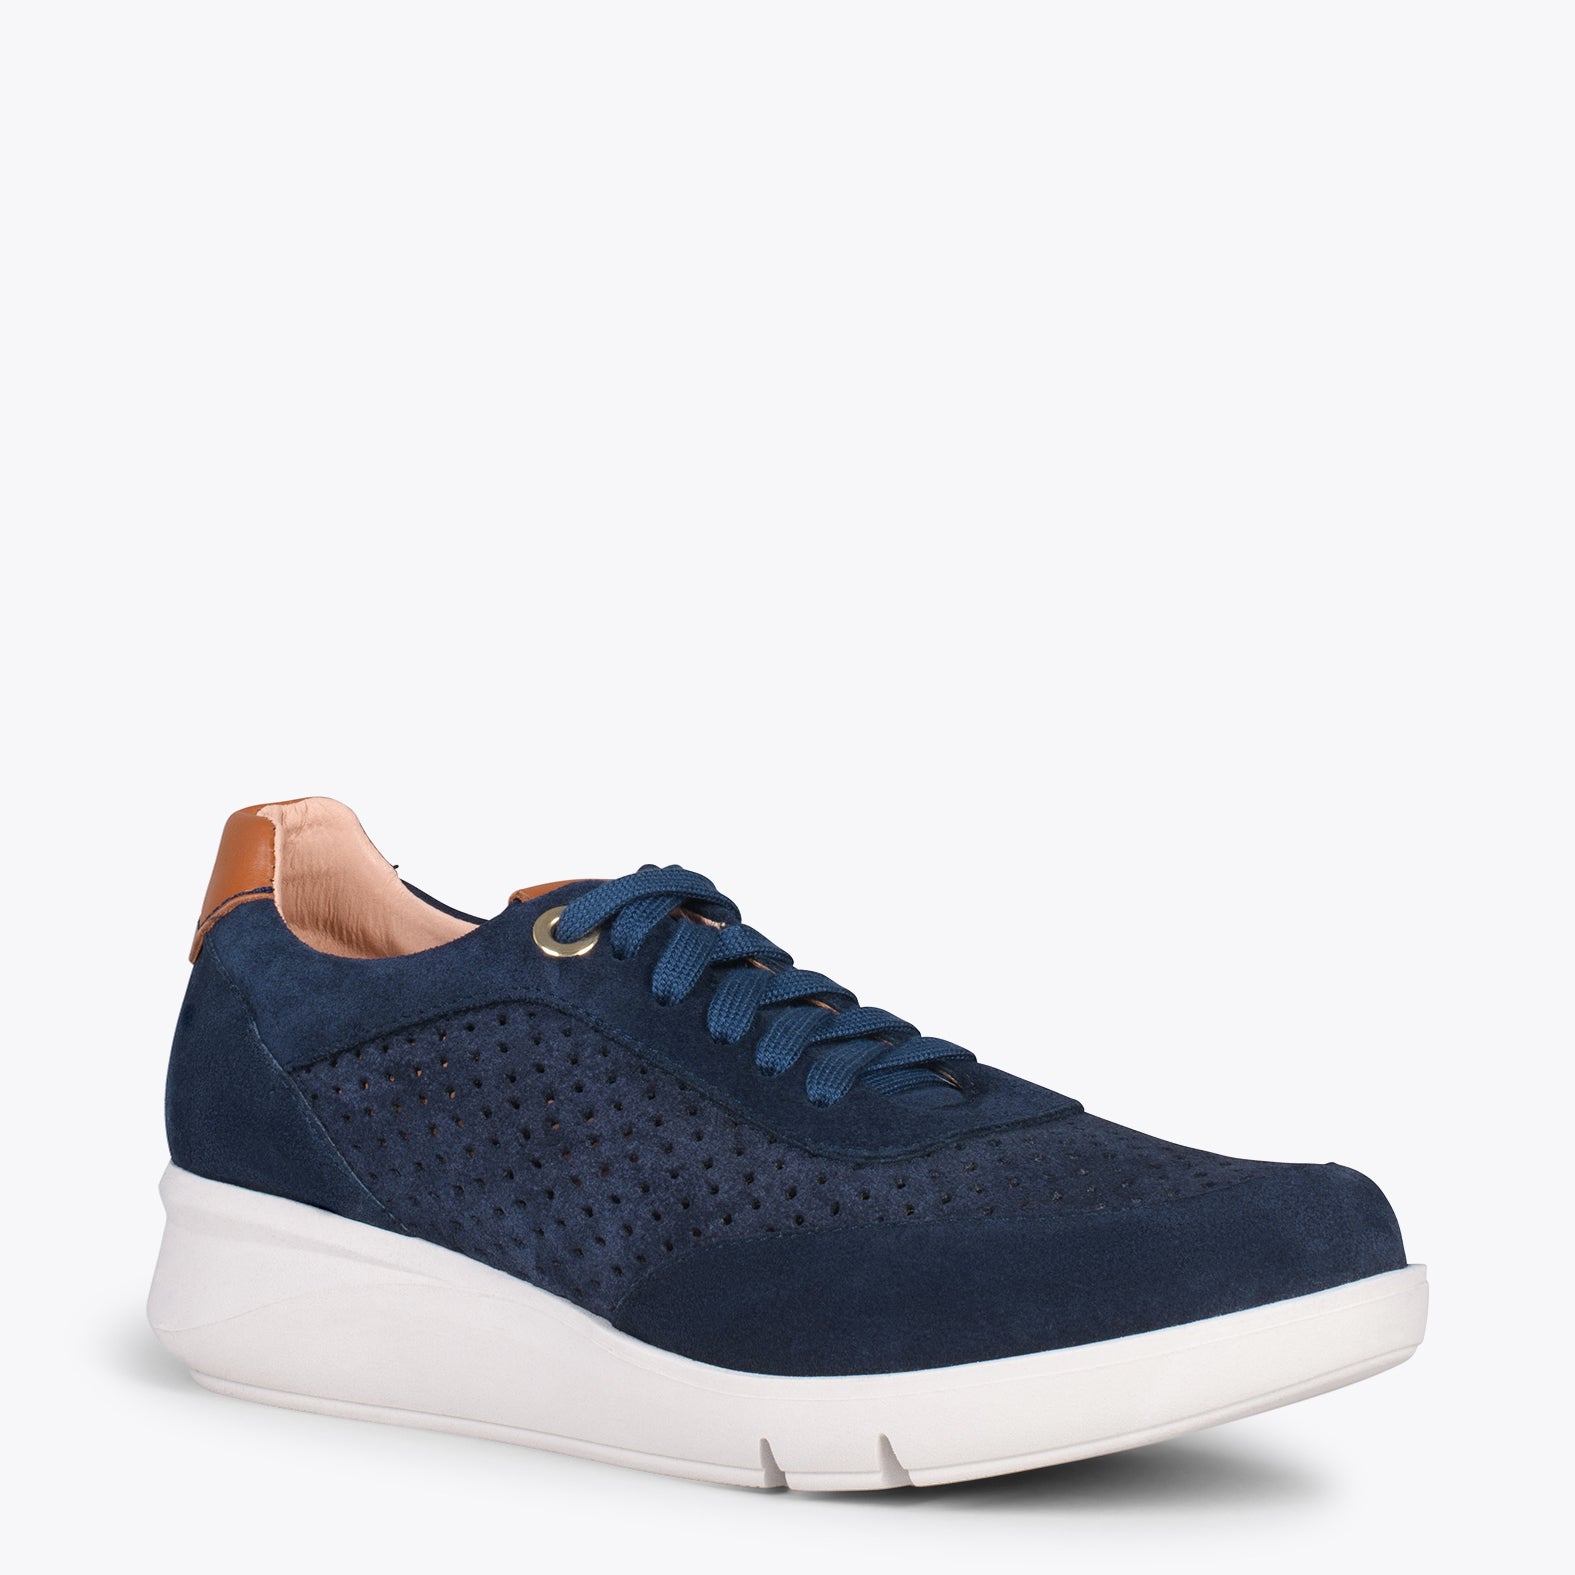 SPORT BLUCHER – NAVY sneakers with wedge